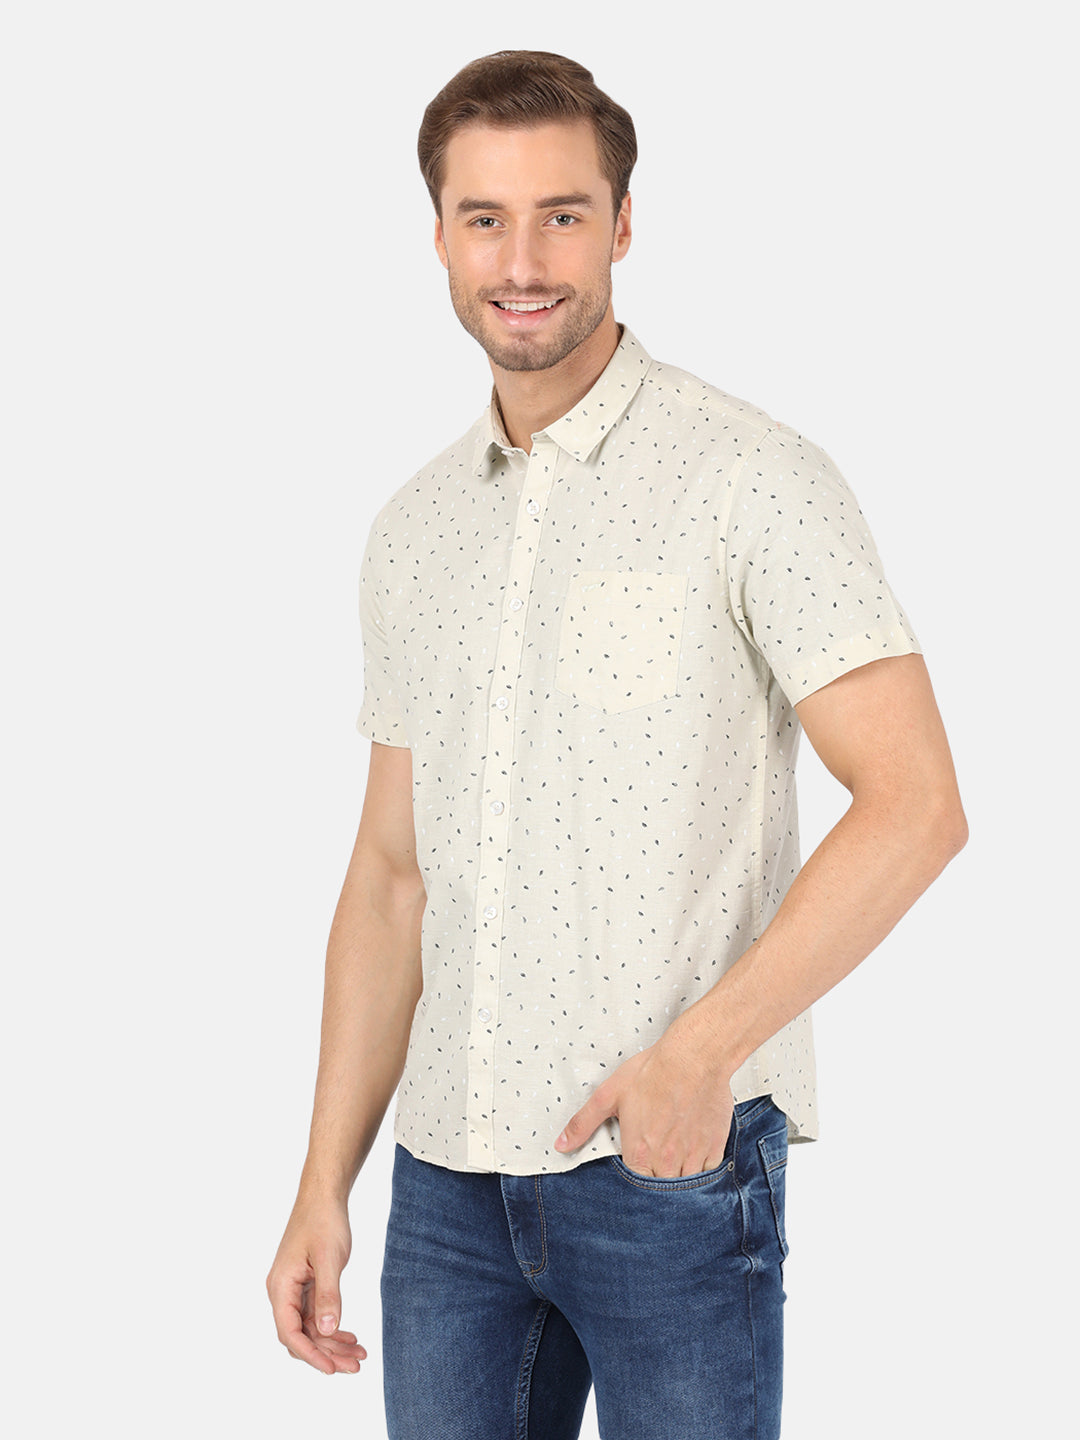 Crocodile Casual Half Sleeve Comfort Fit Printed Beige with Collar Shirt for Men